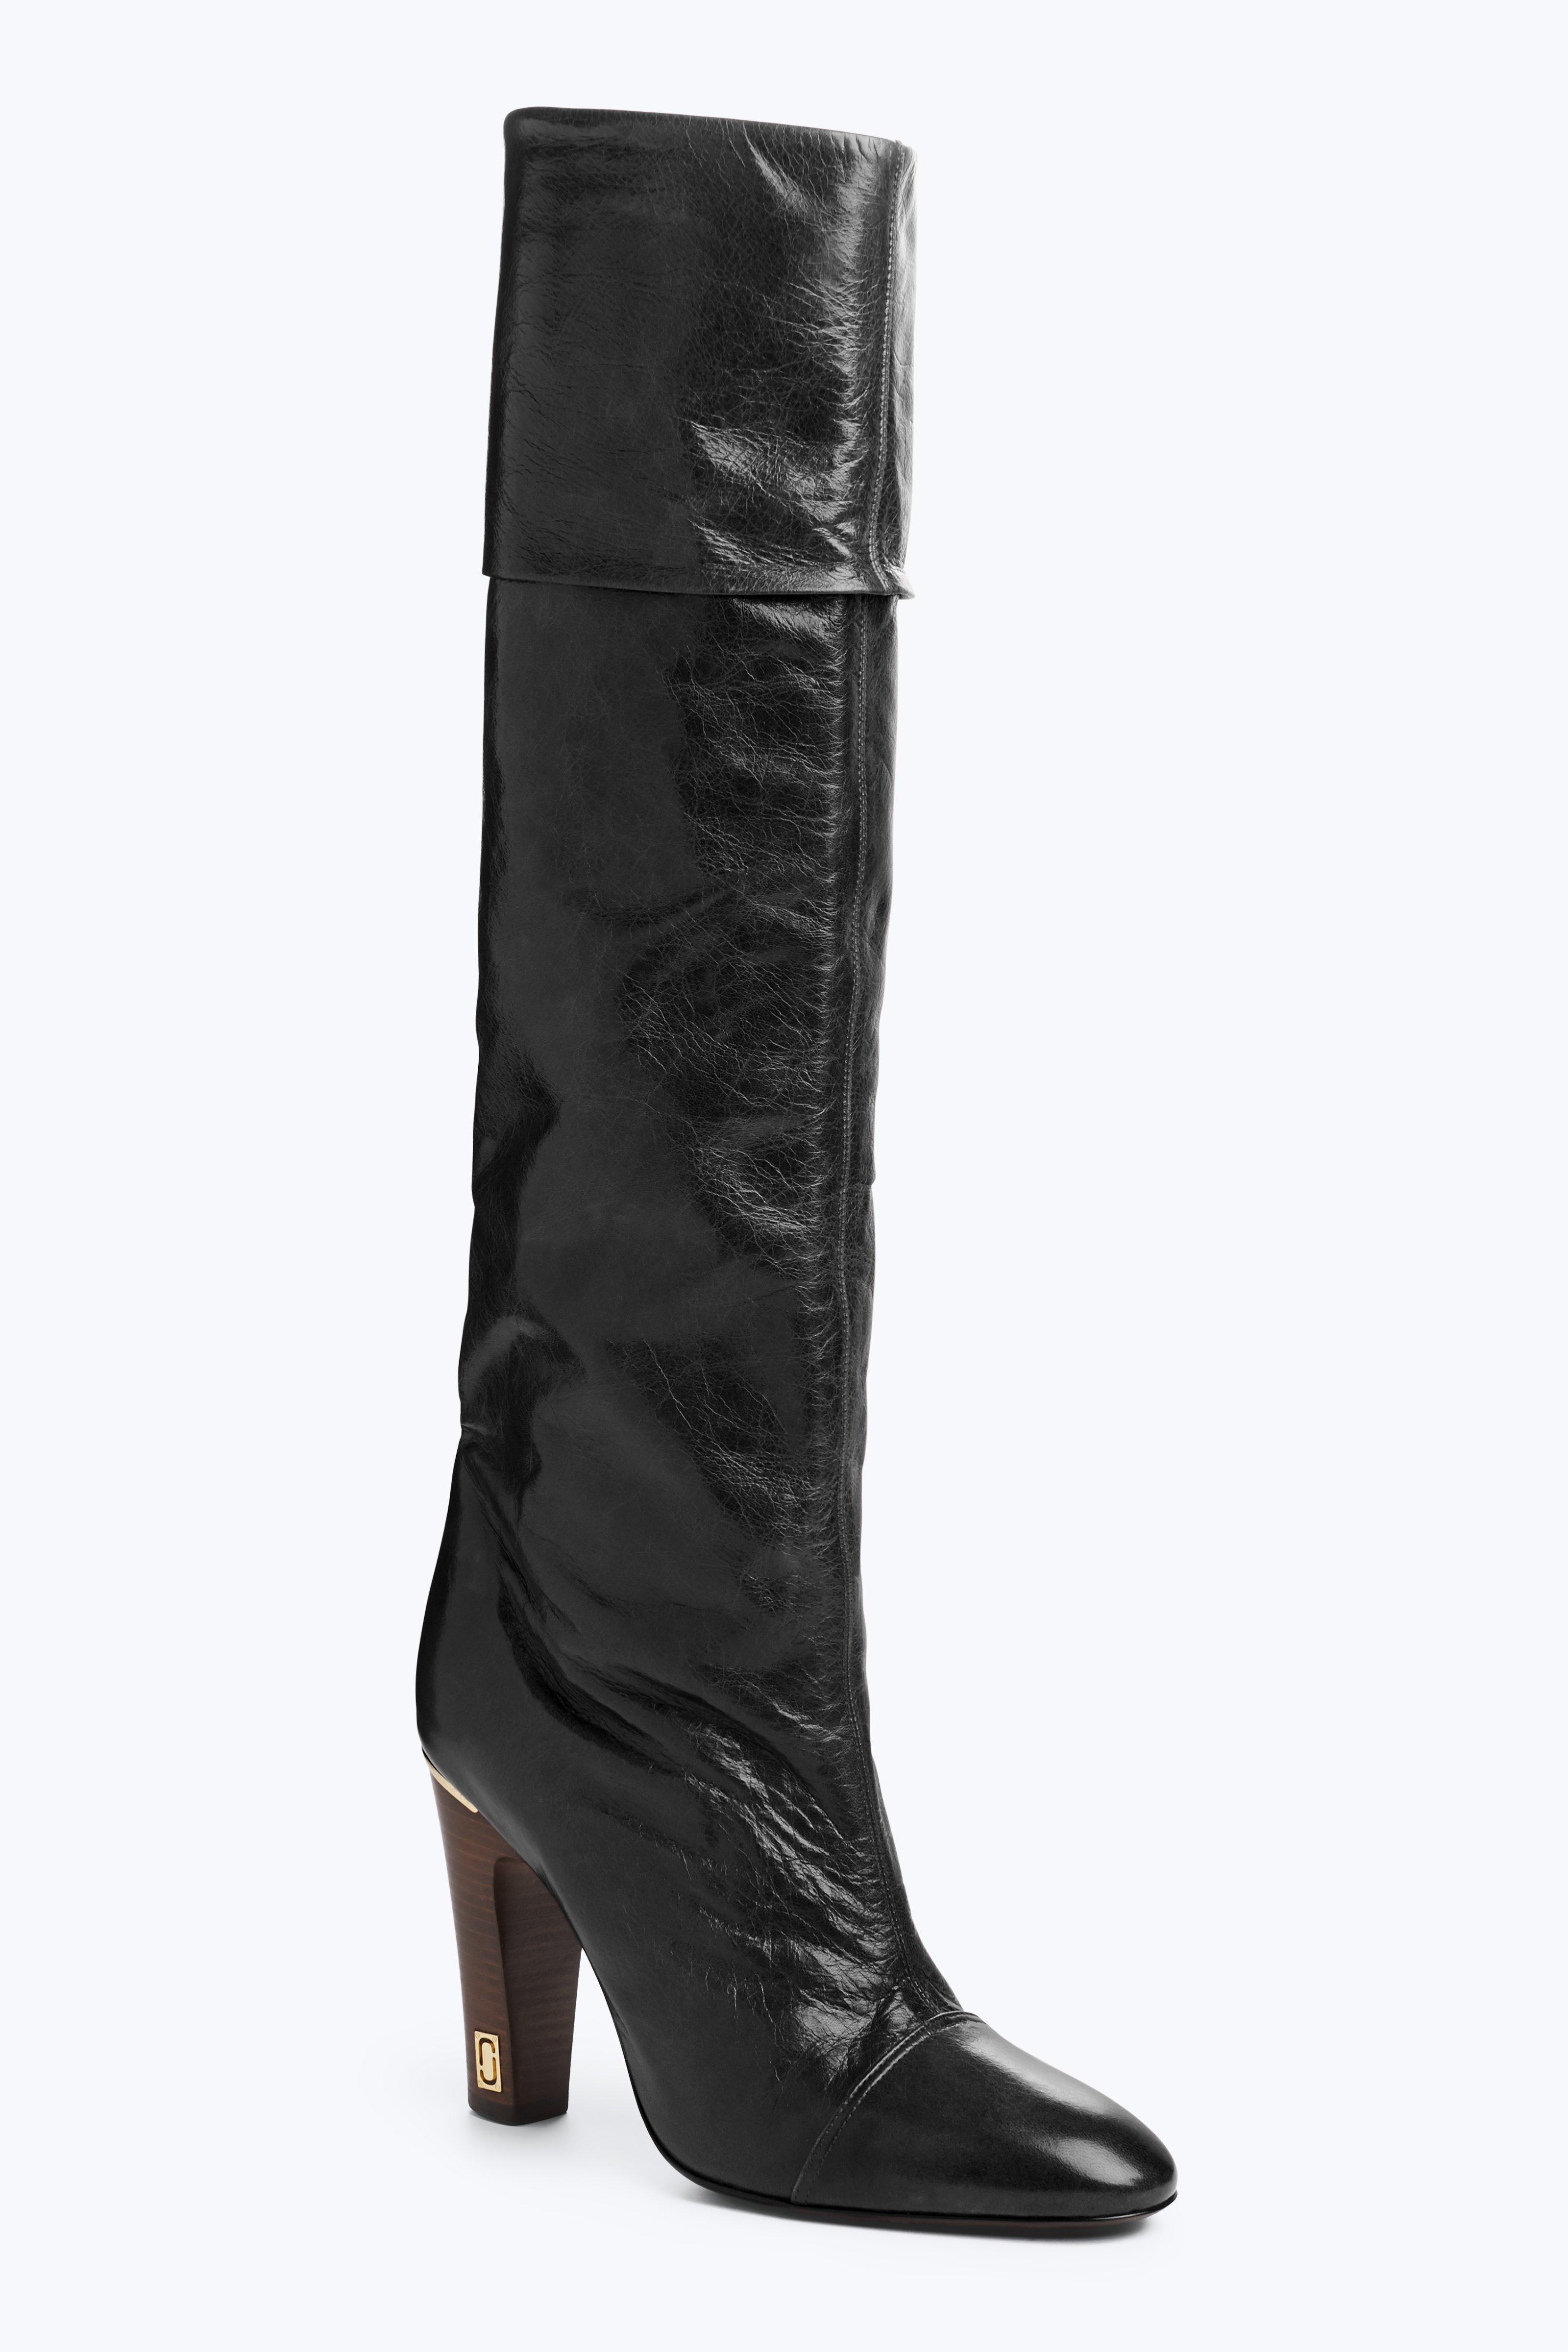 marc jacobs tall boots